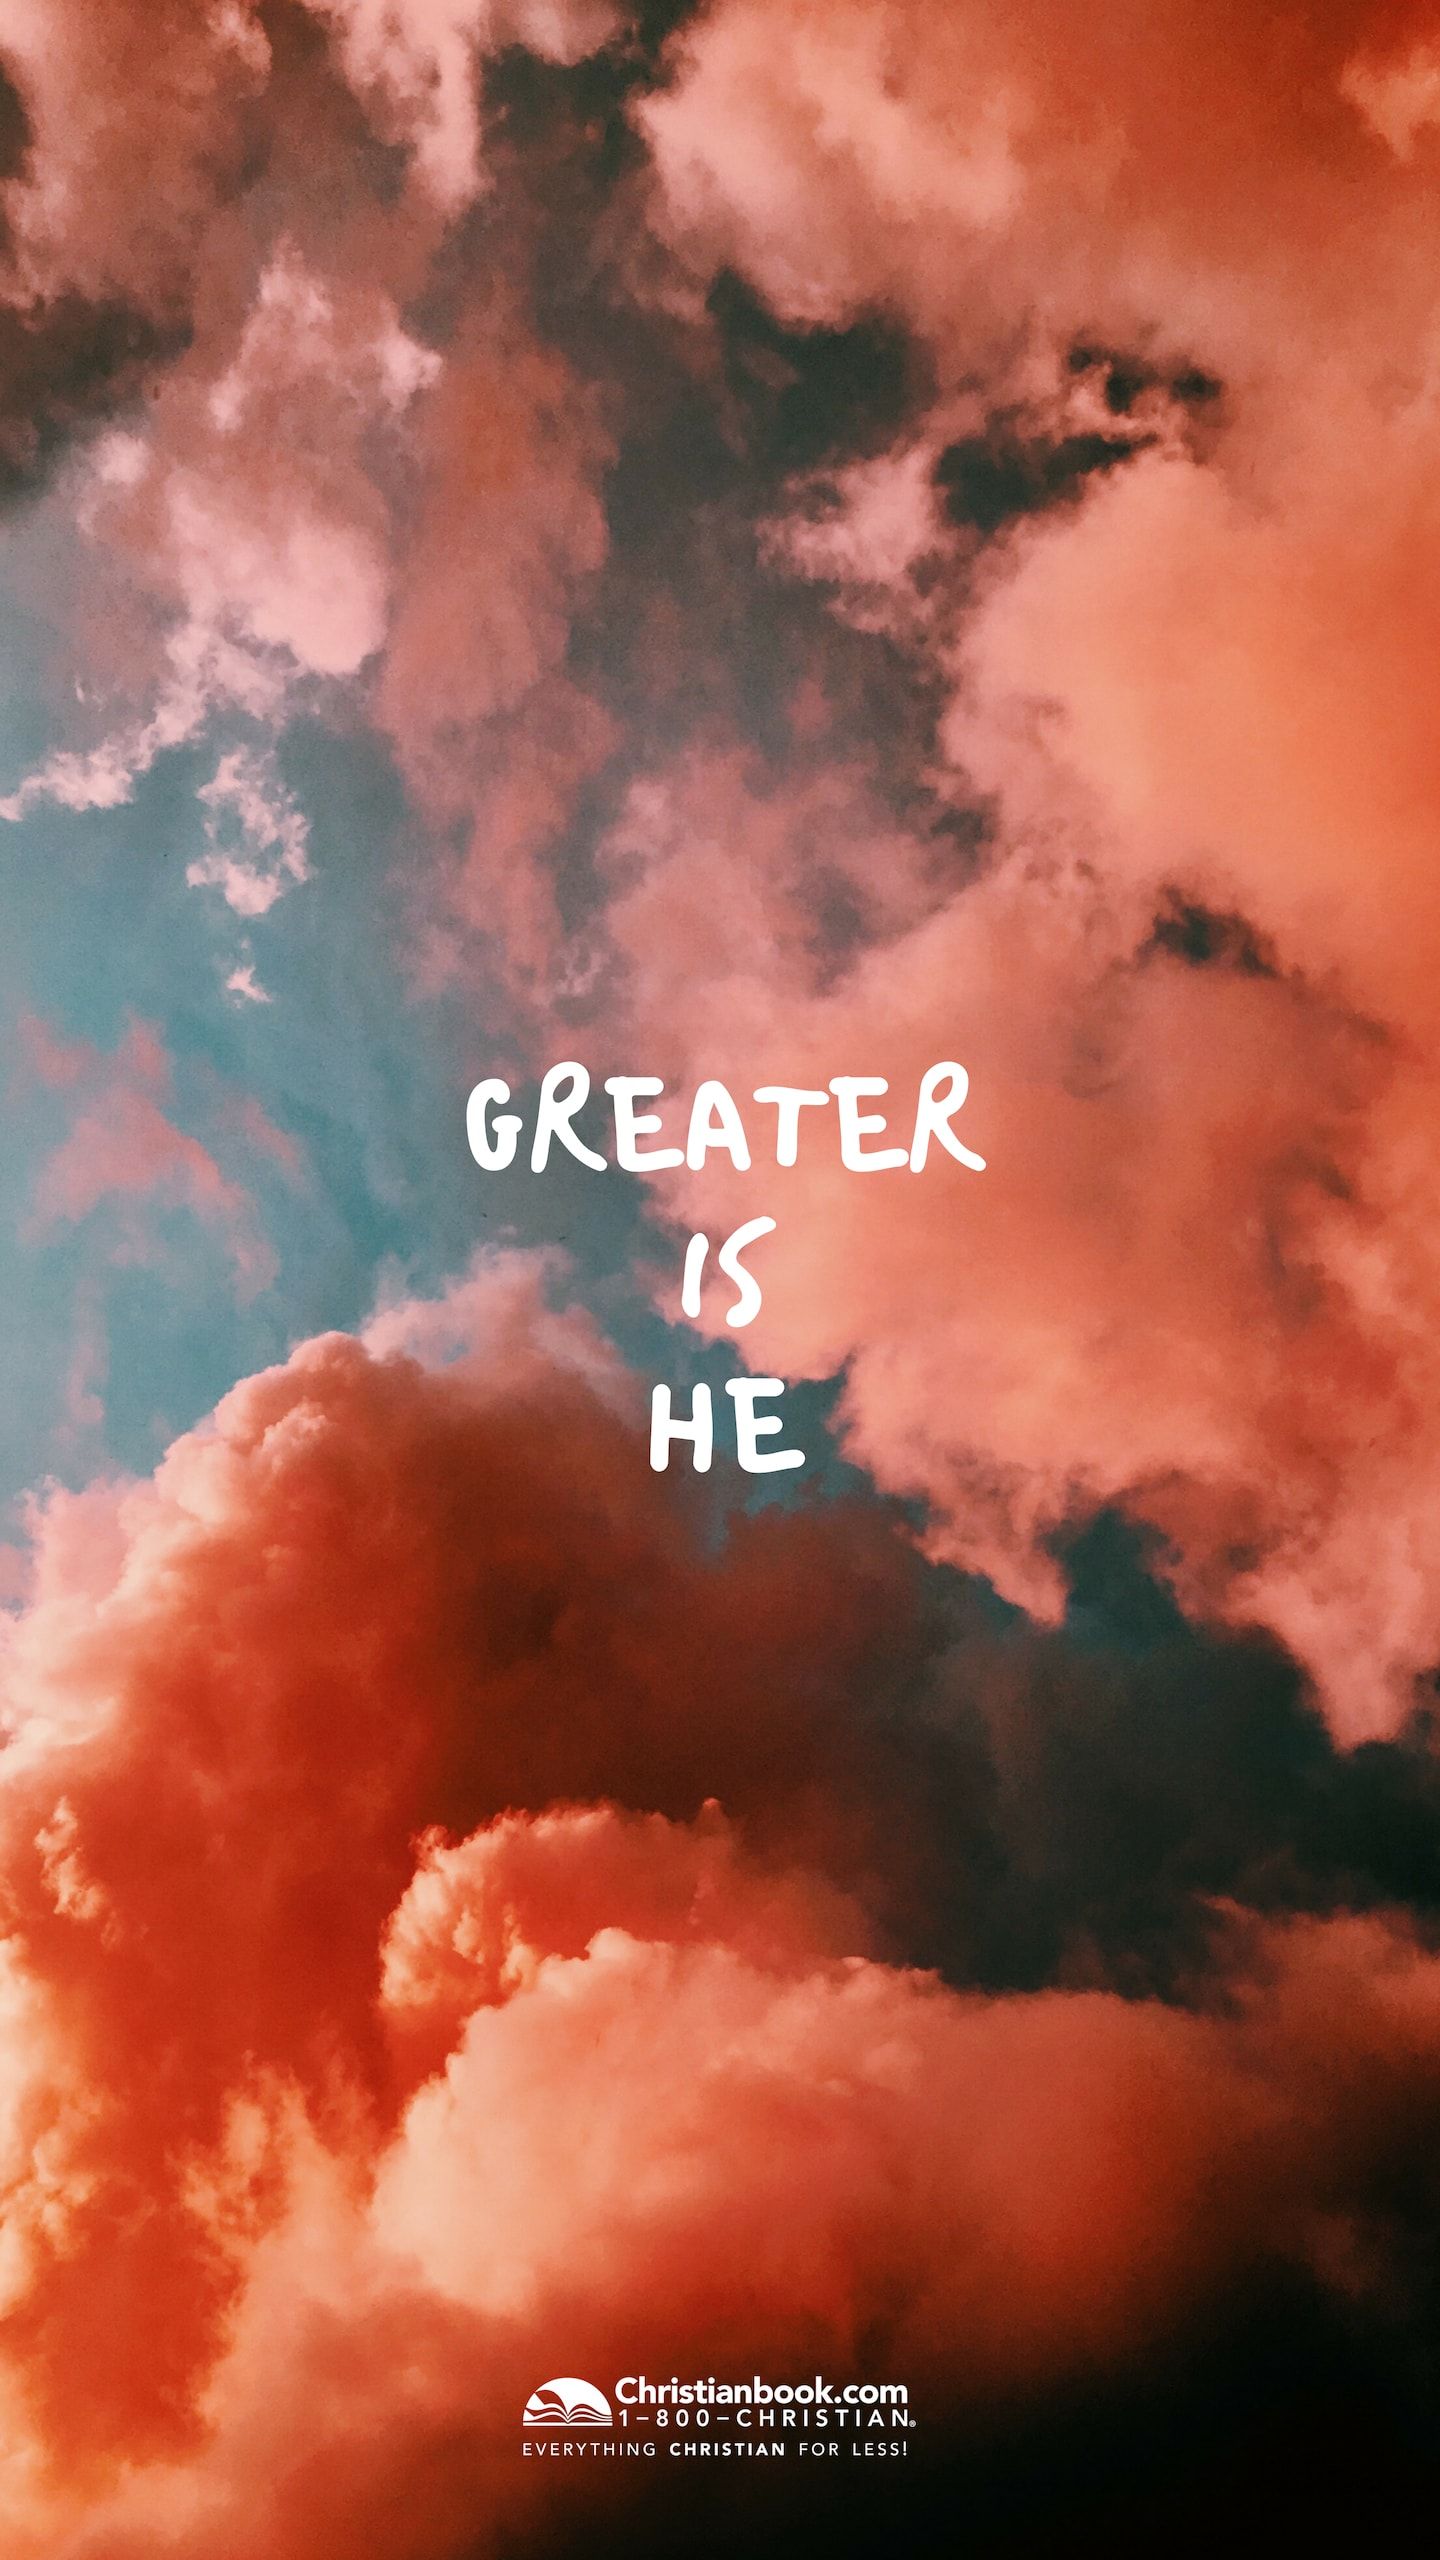 200+] God Quotes Wallpapers | Wallpapers.com